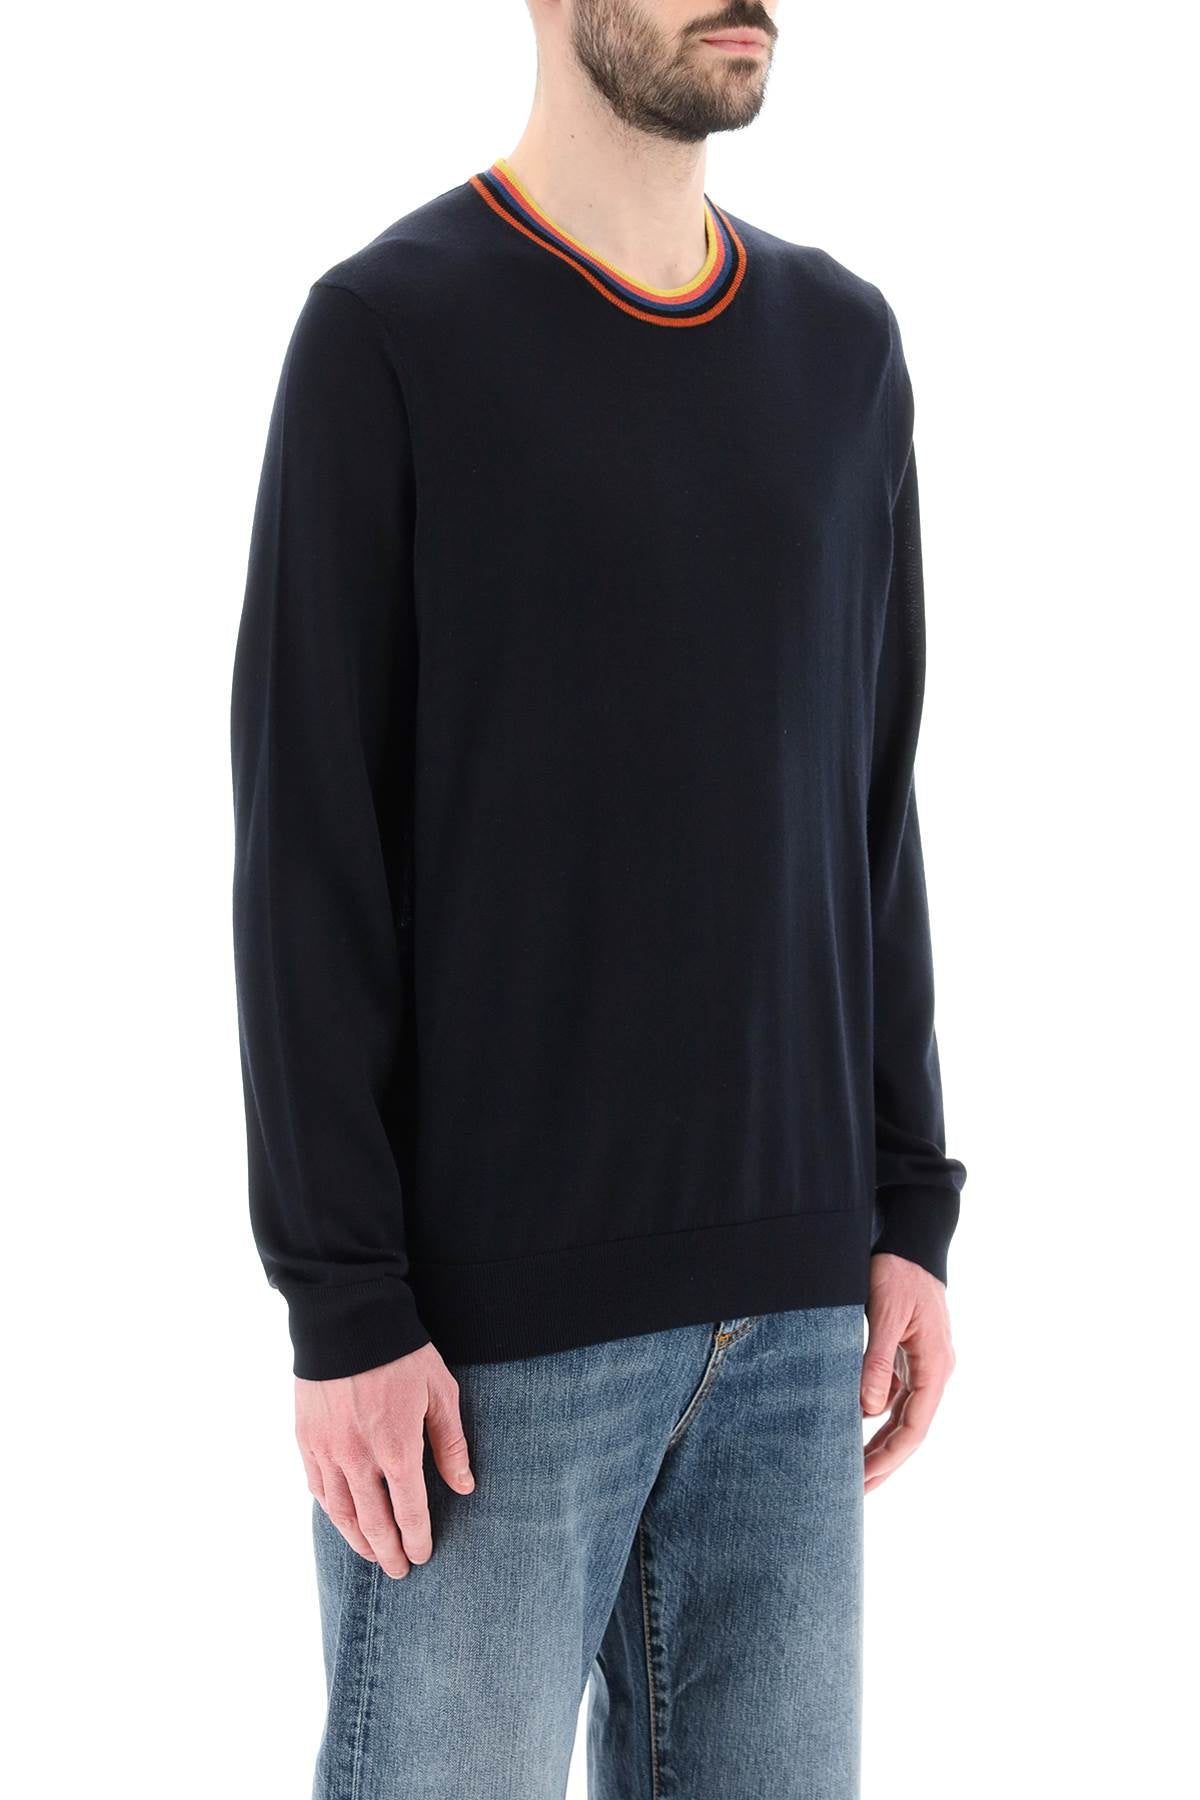 Paul smith merino wool sweater with tricolour detail